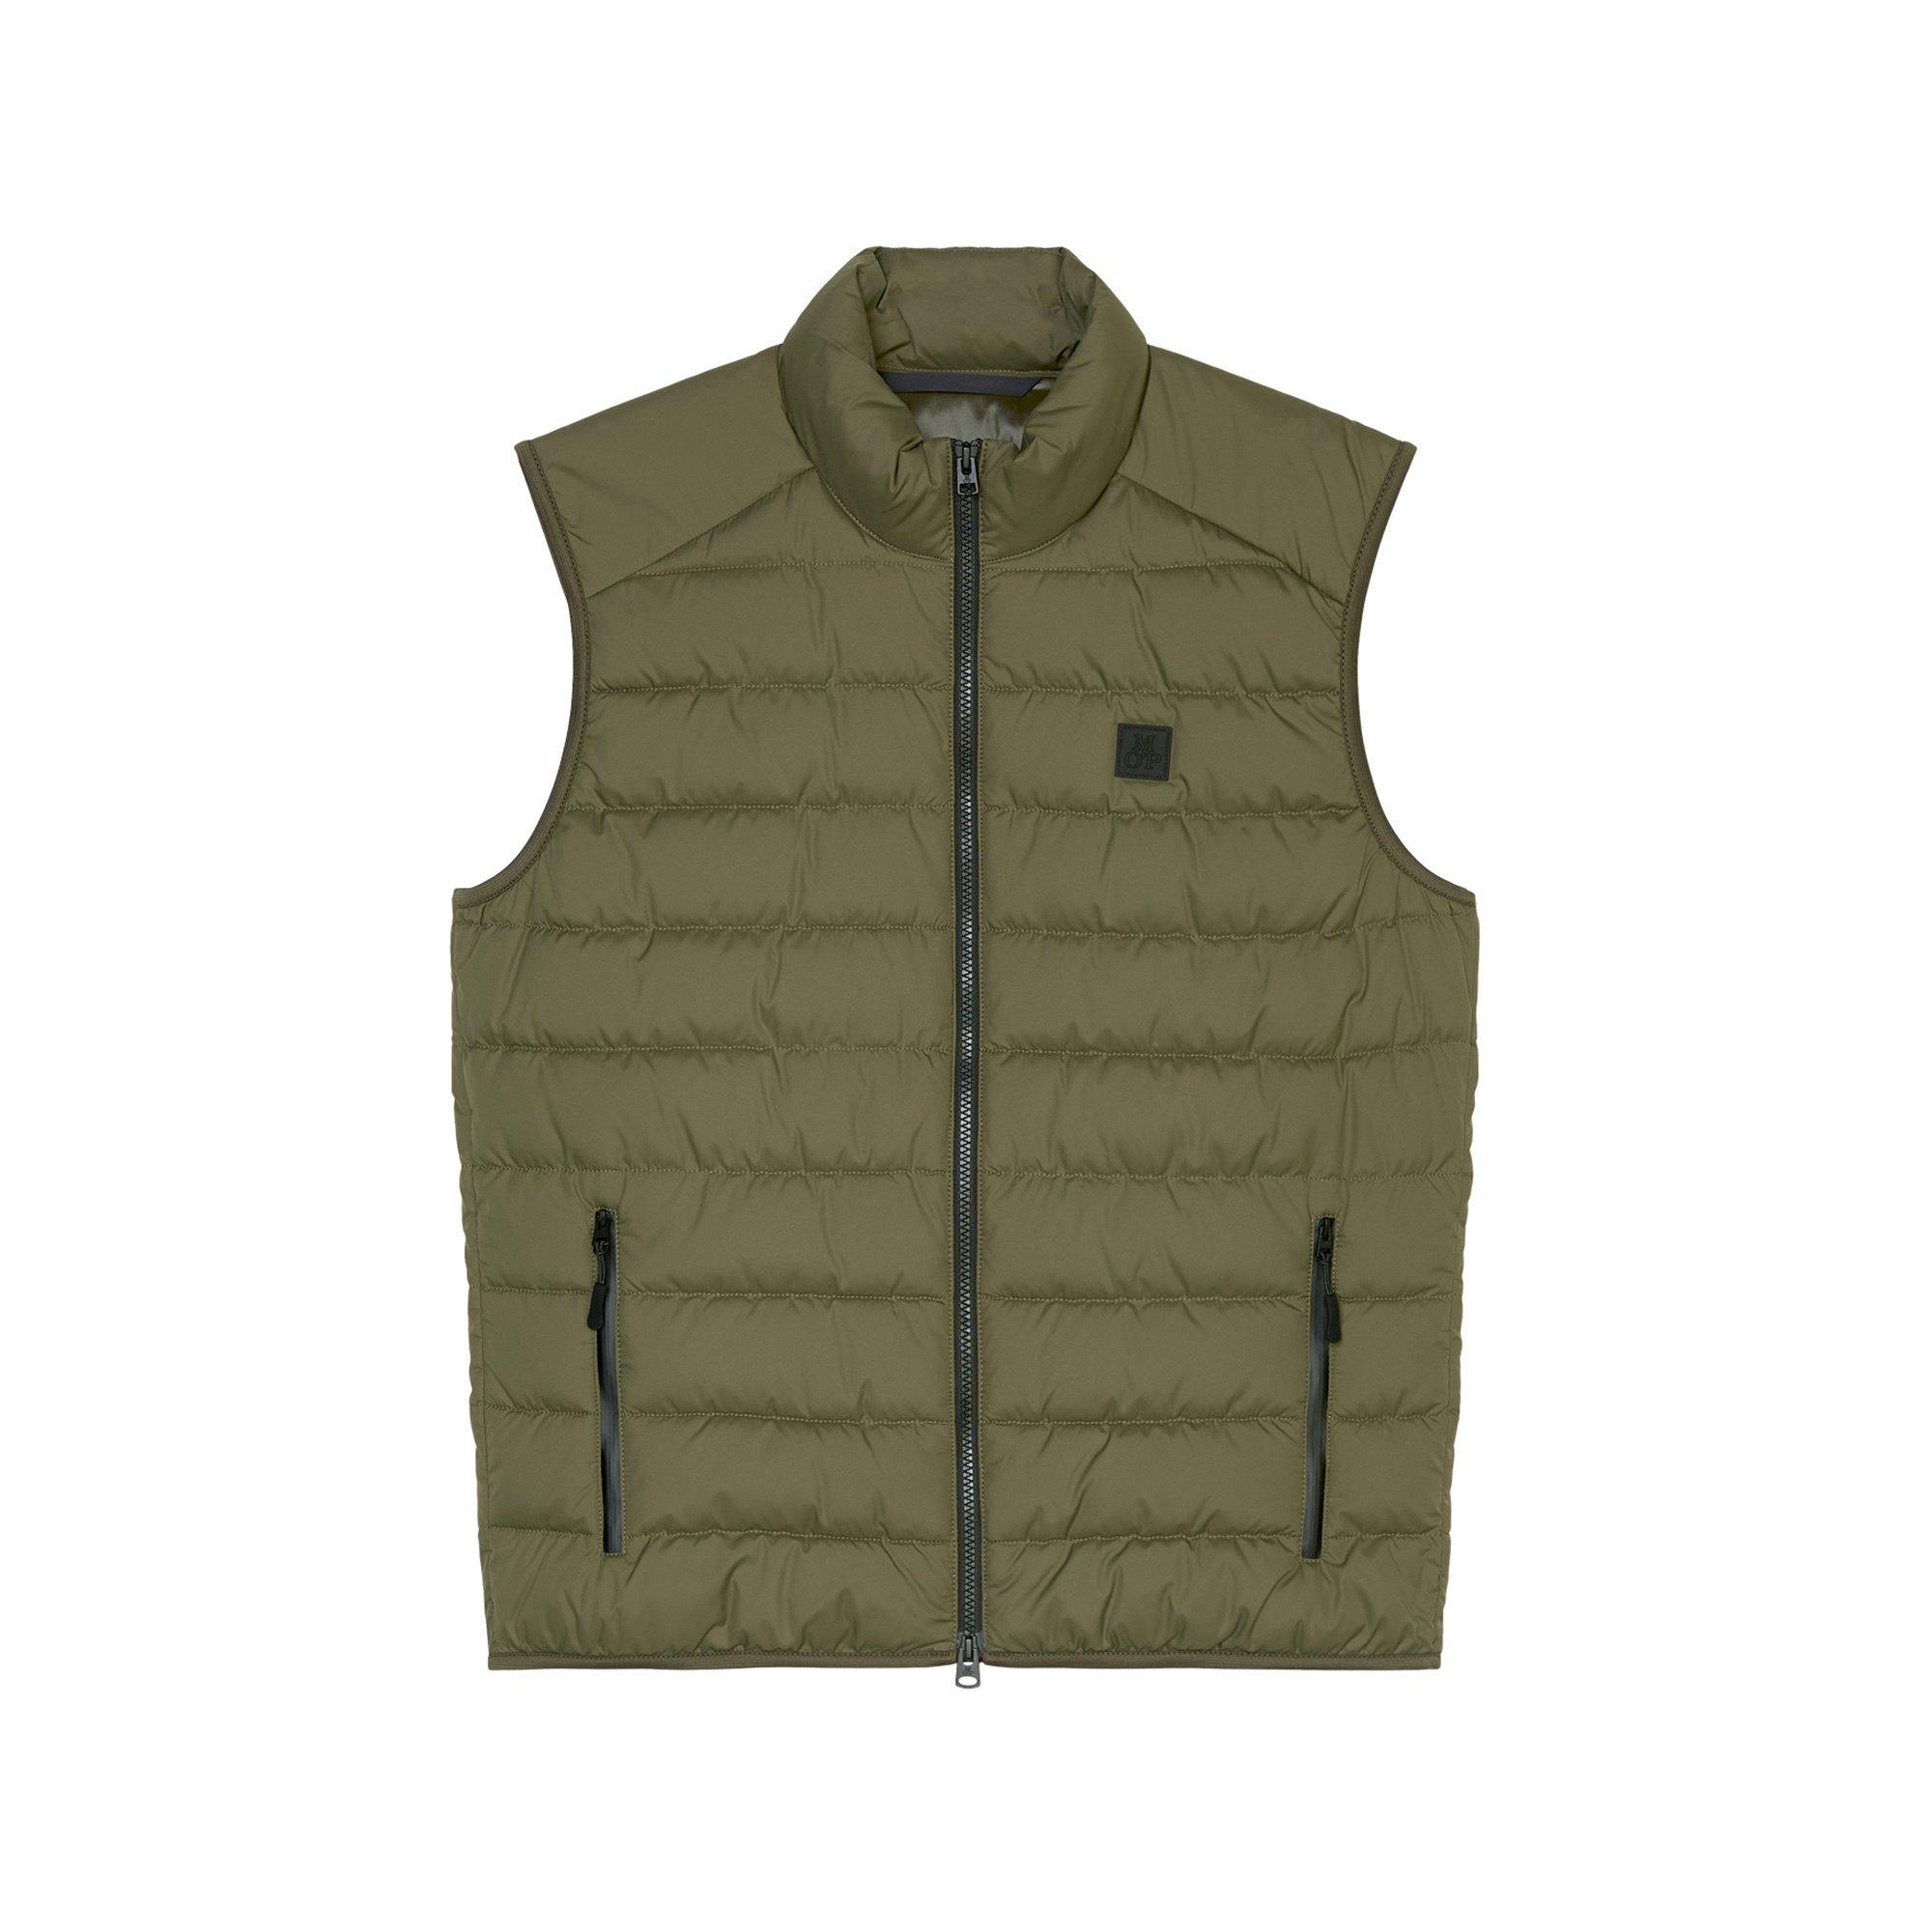 Marc O'Polo Vest, sdnd, stand-up collar, zip pockets, elastic binding Gilet 